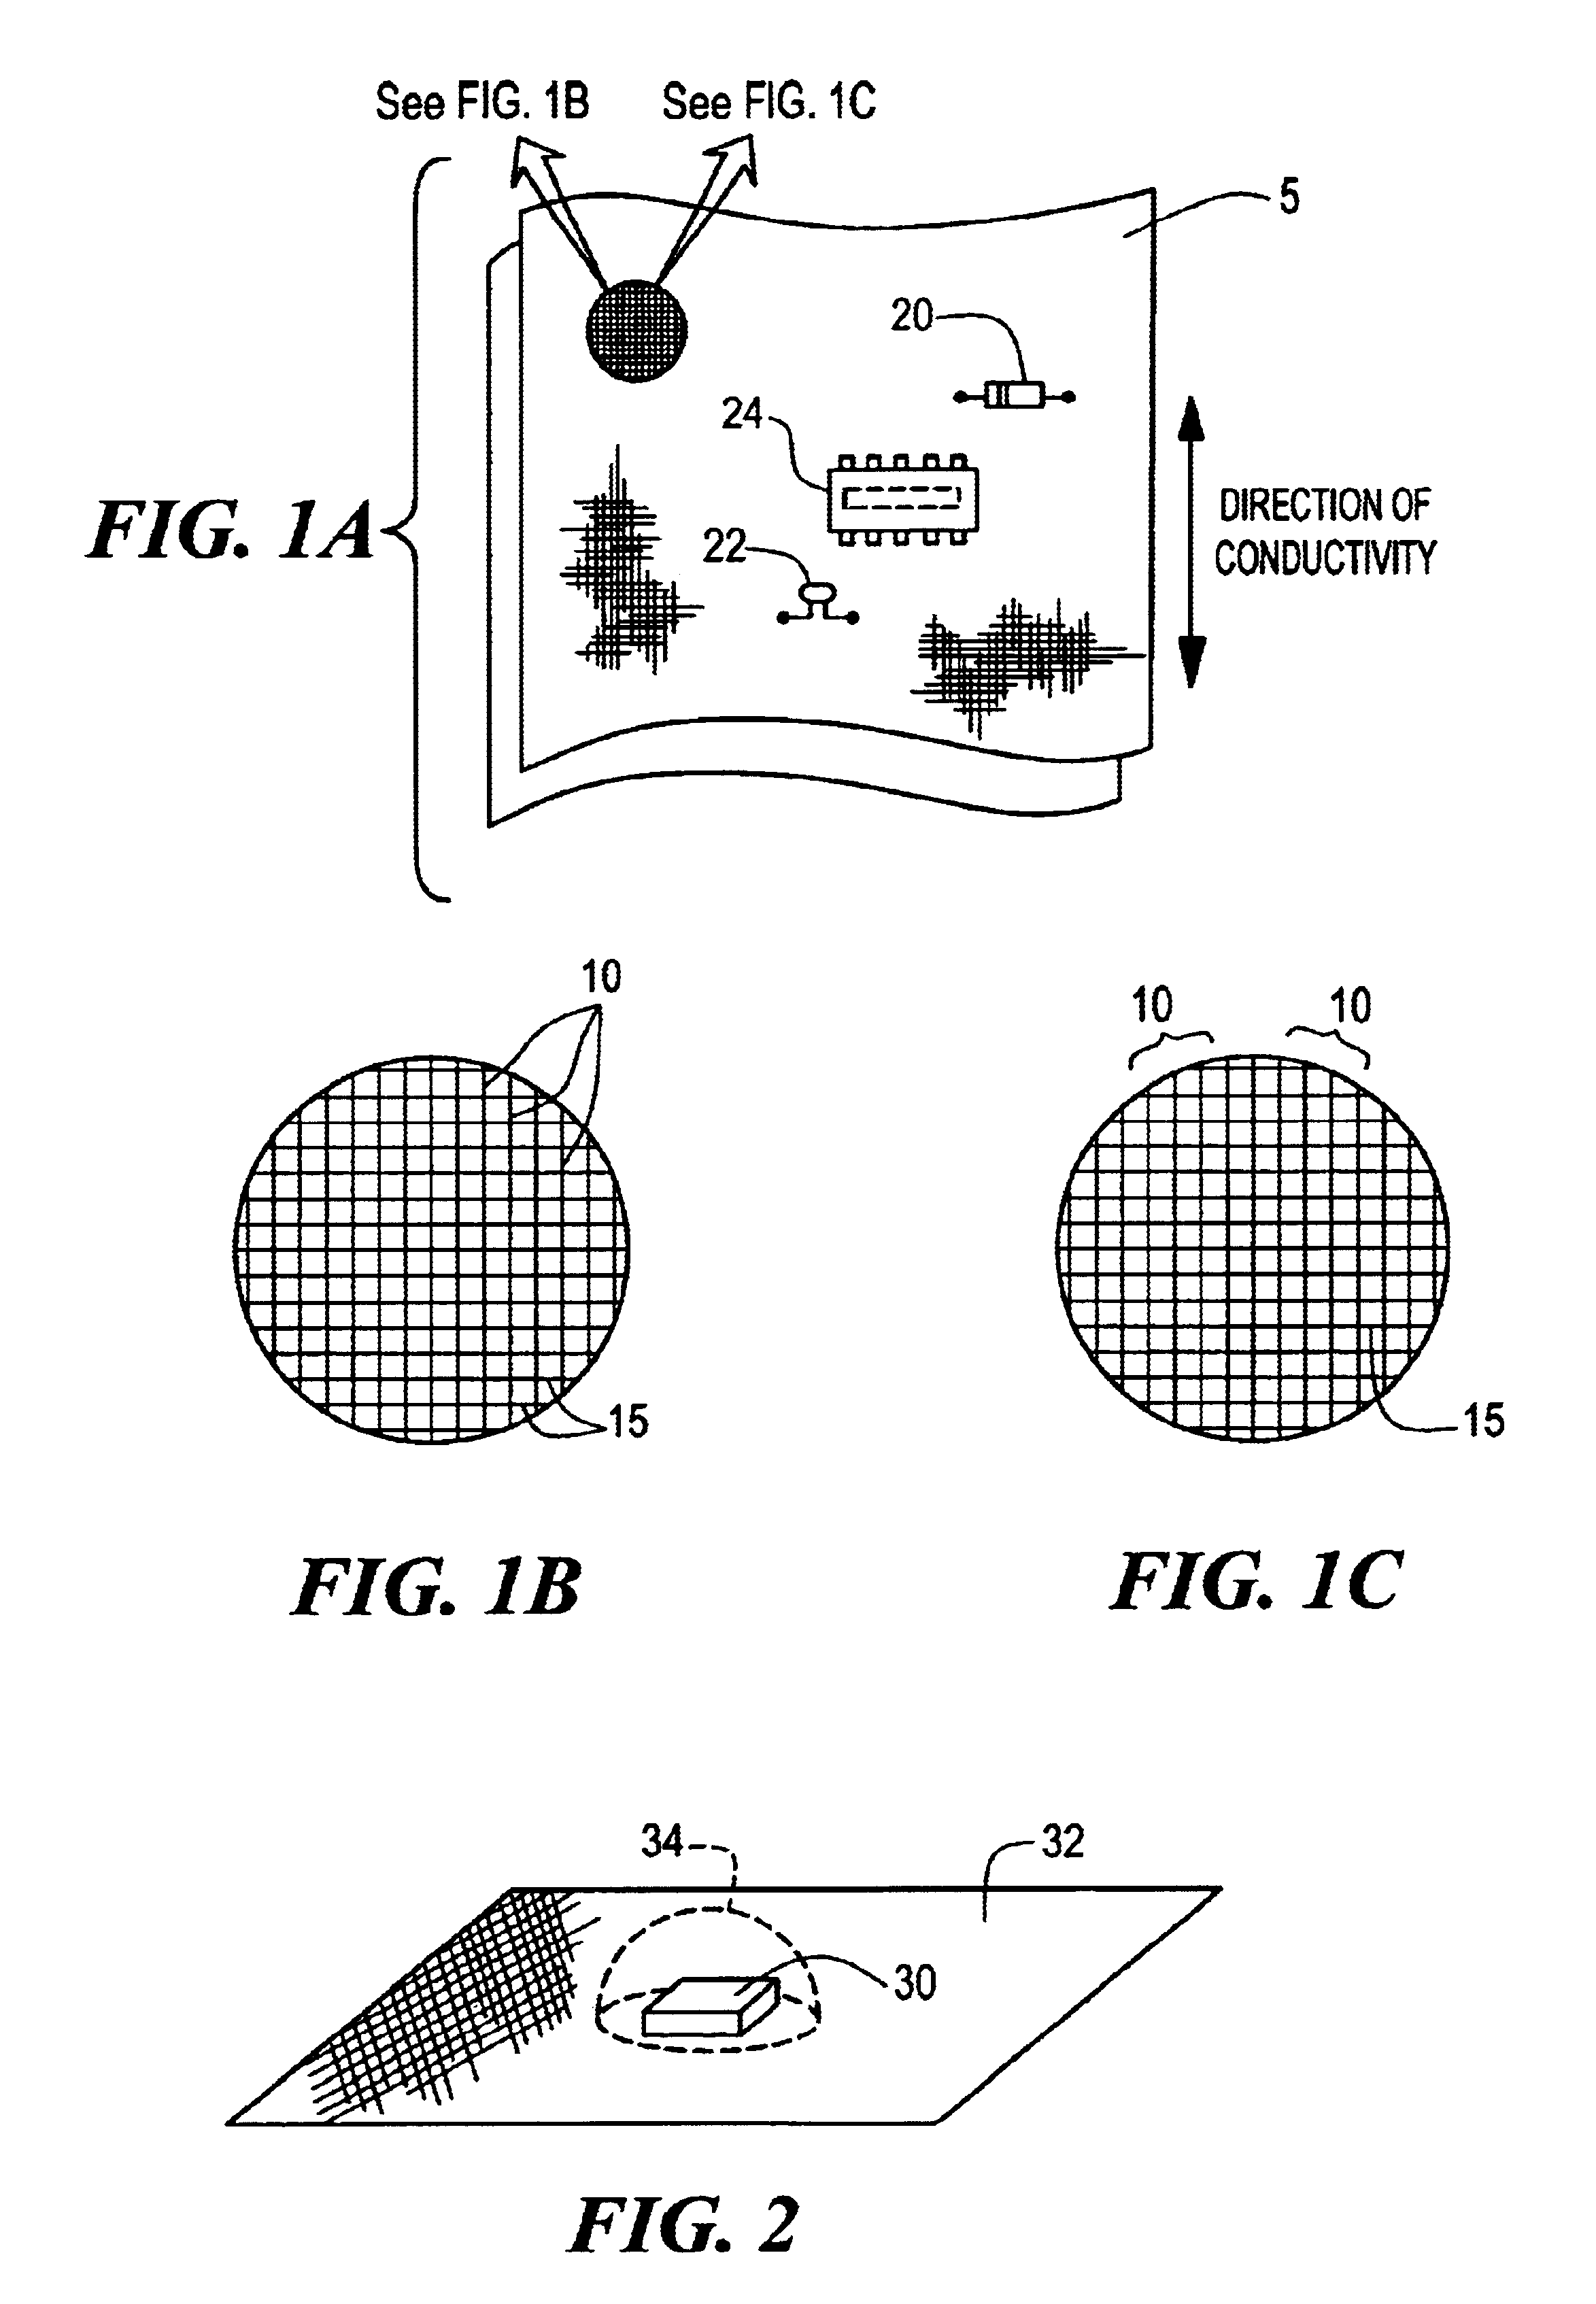 Method of manufacturing a fabric article to include electronic circuitry and an electrically active textile article